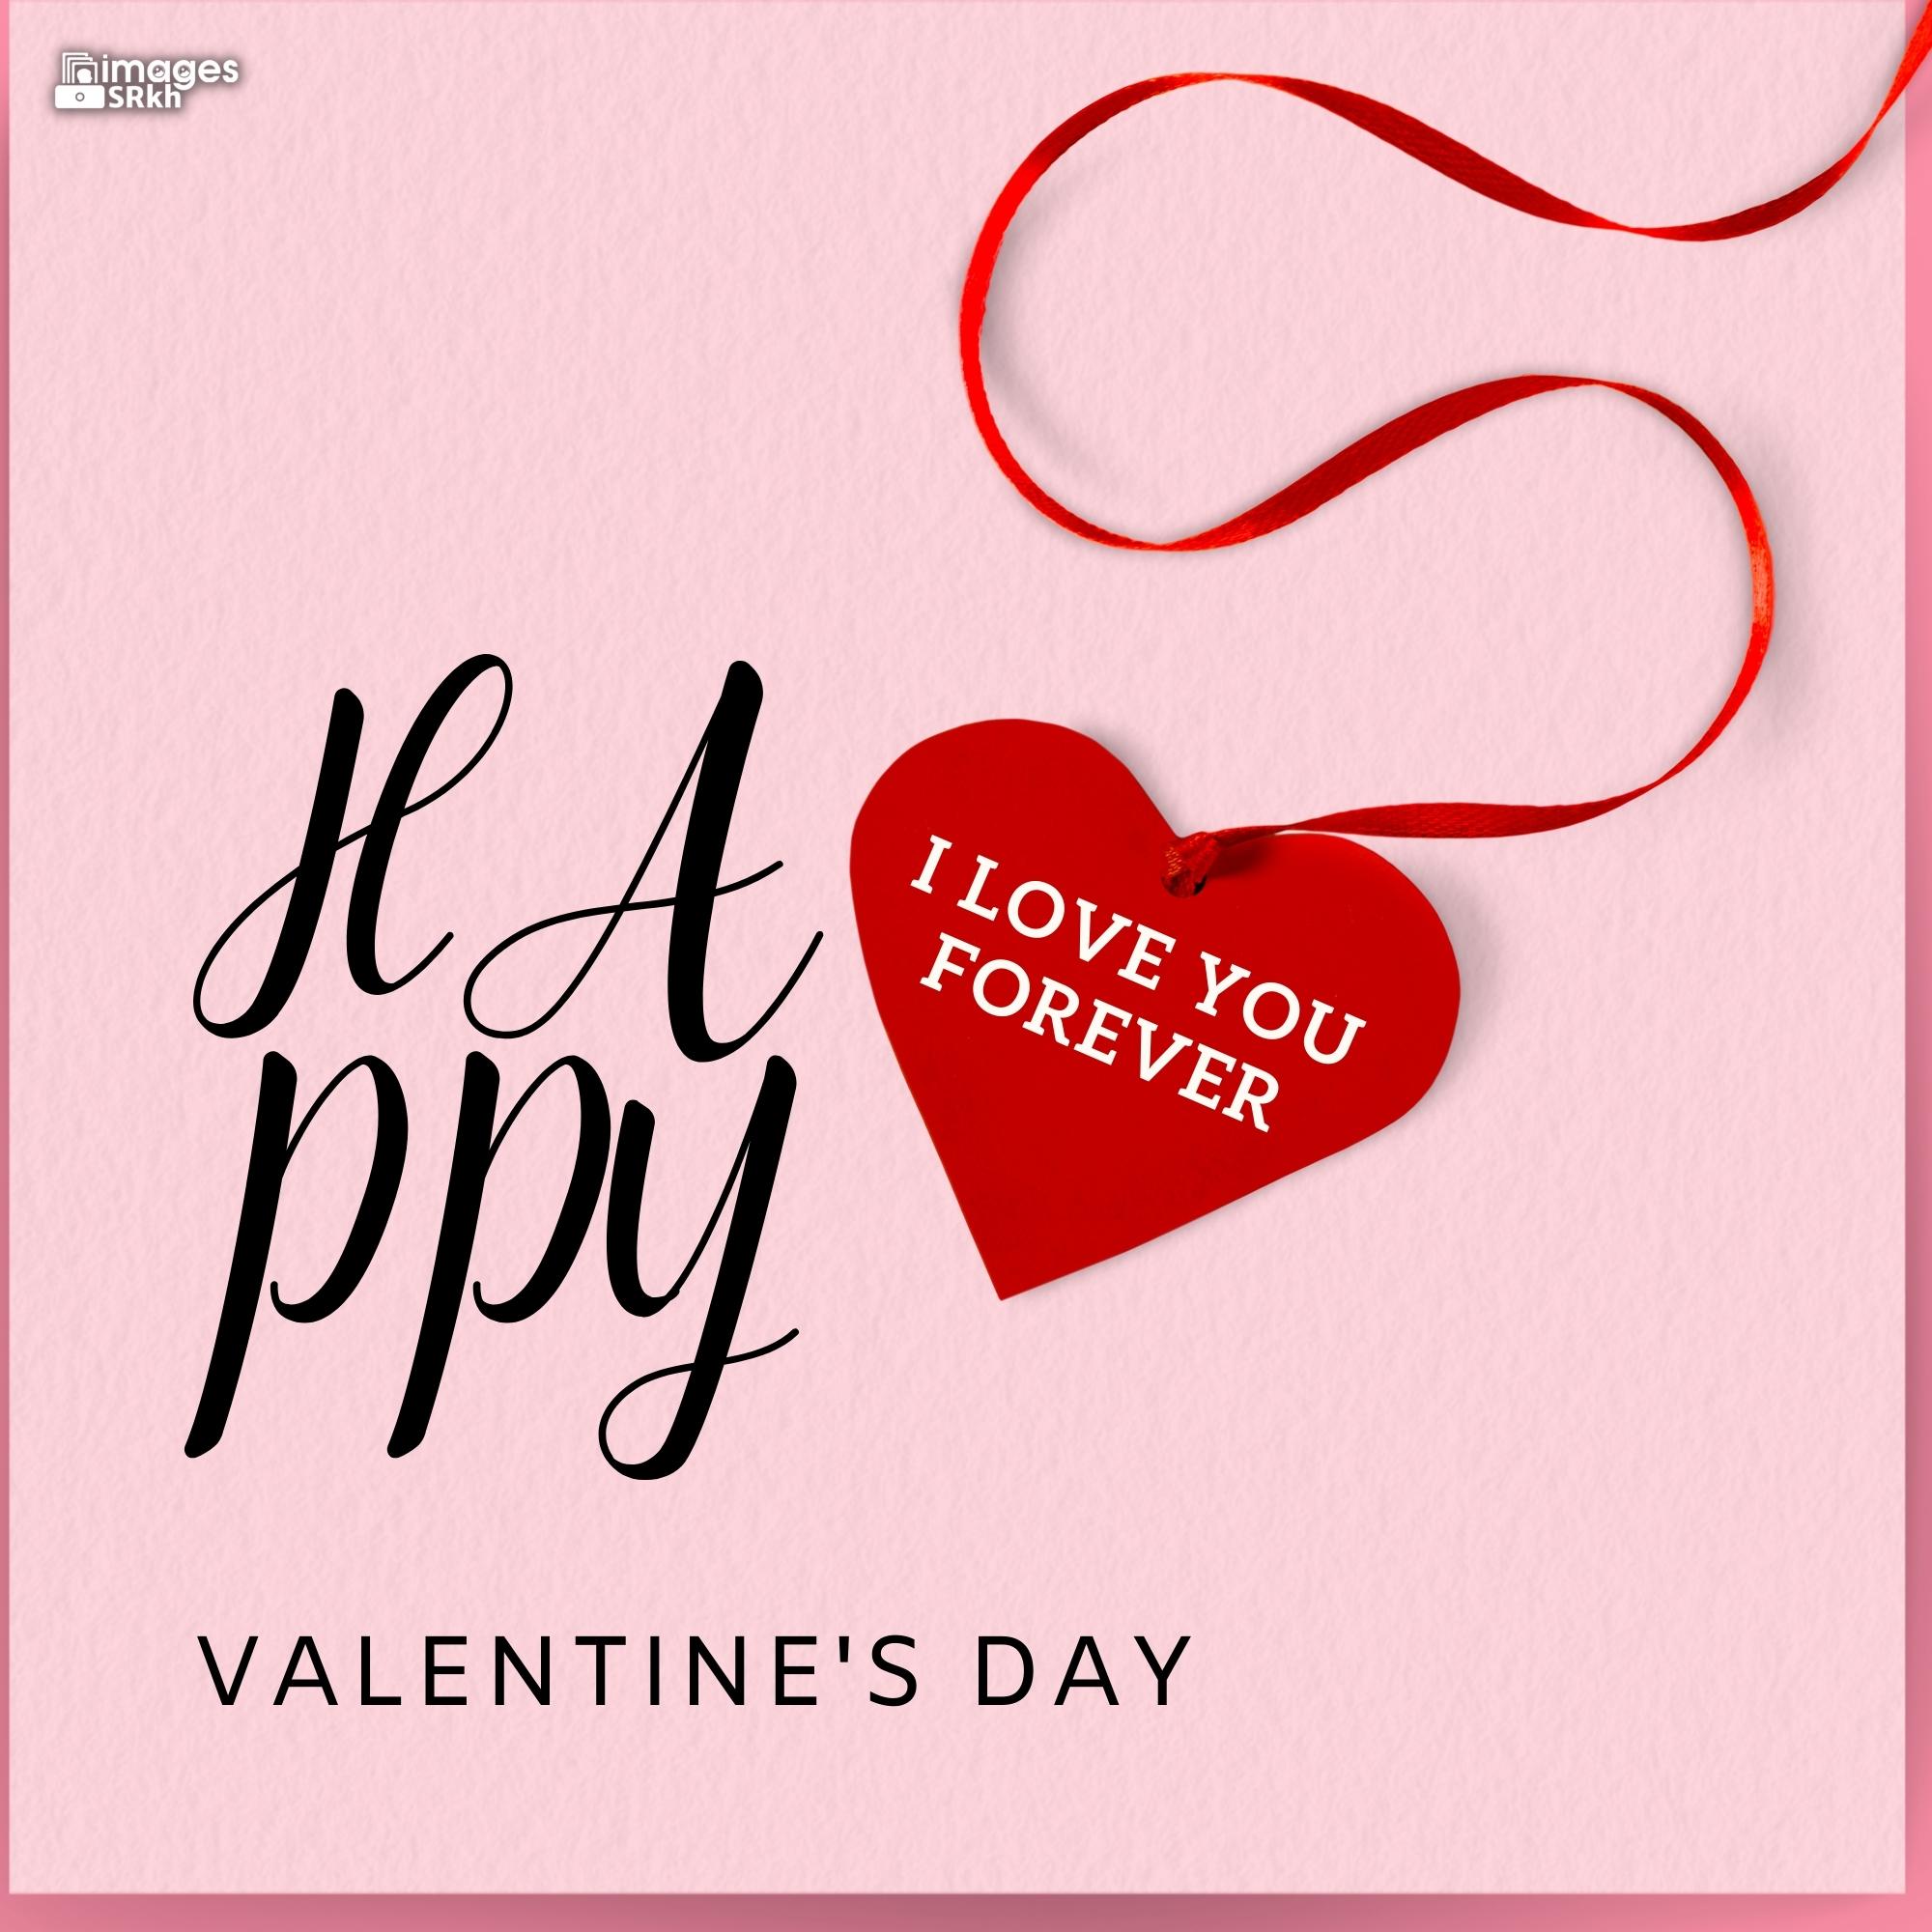 Happy Valentines Day | 442 | PREMIUM IMAGES | Wishes for Love